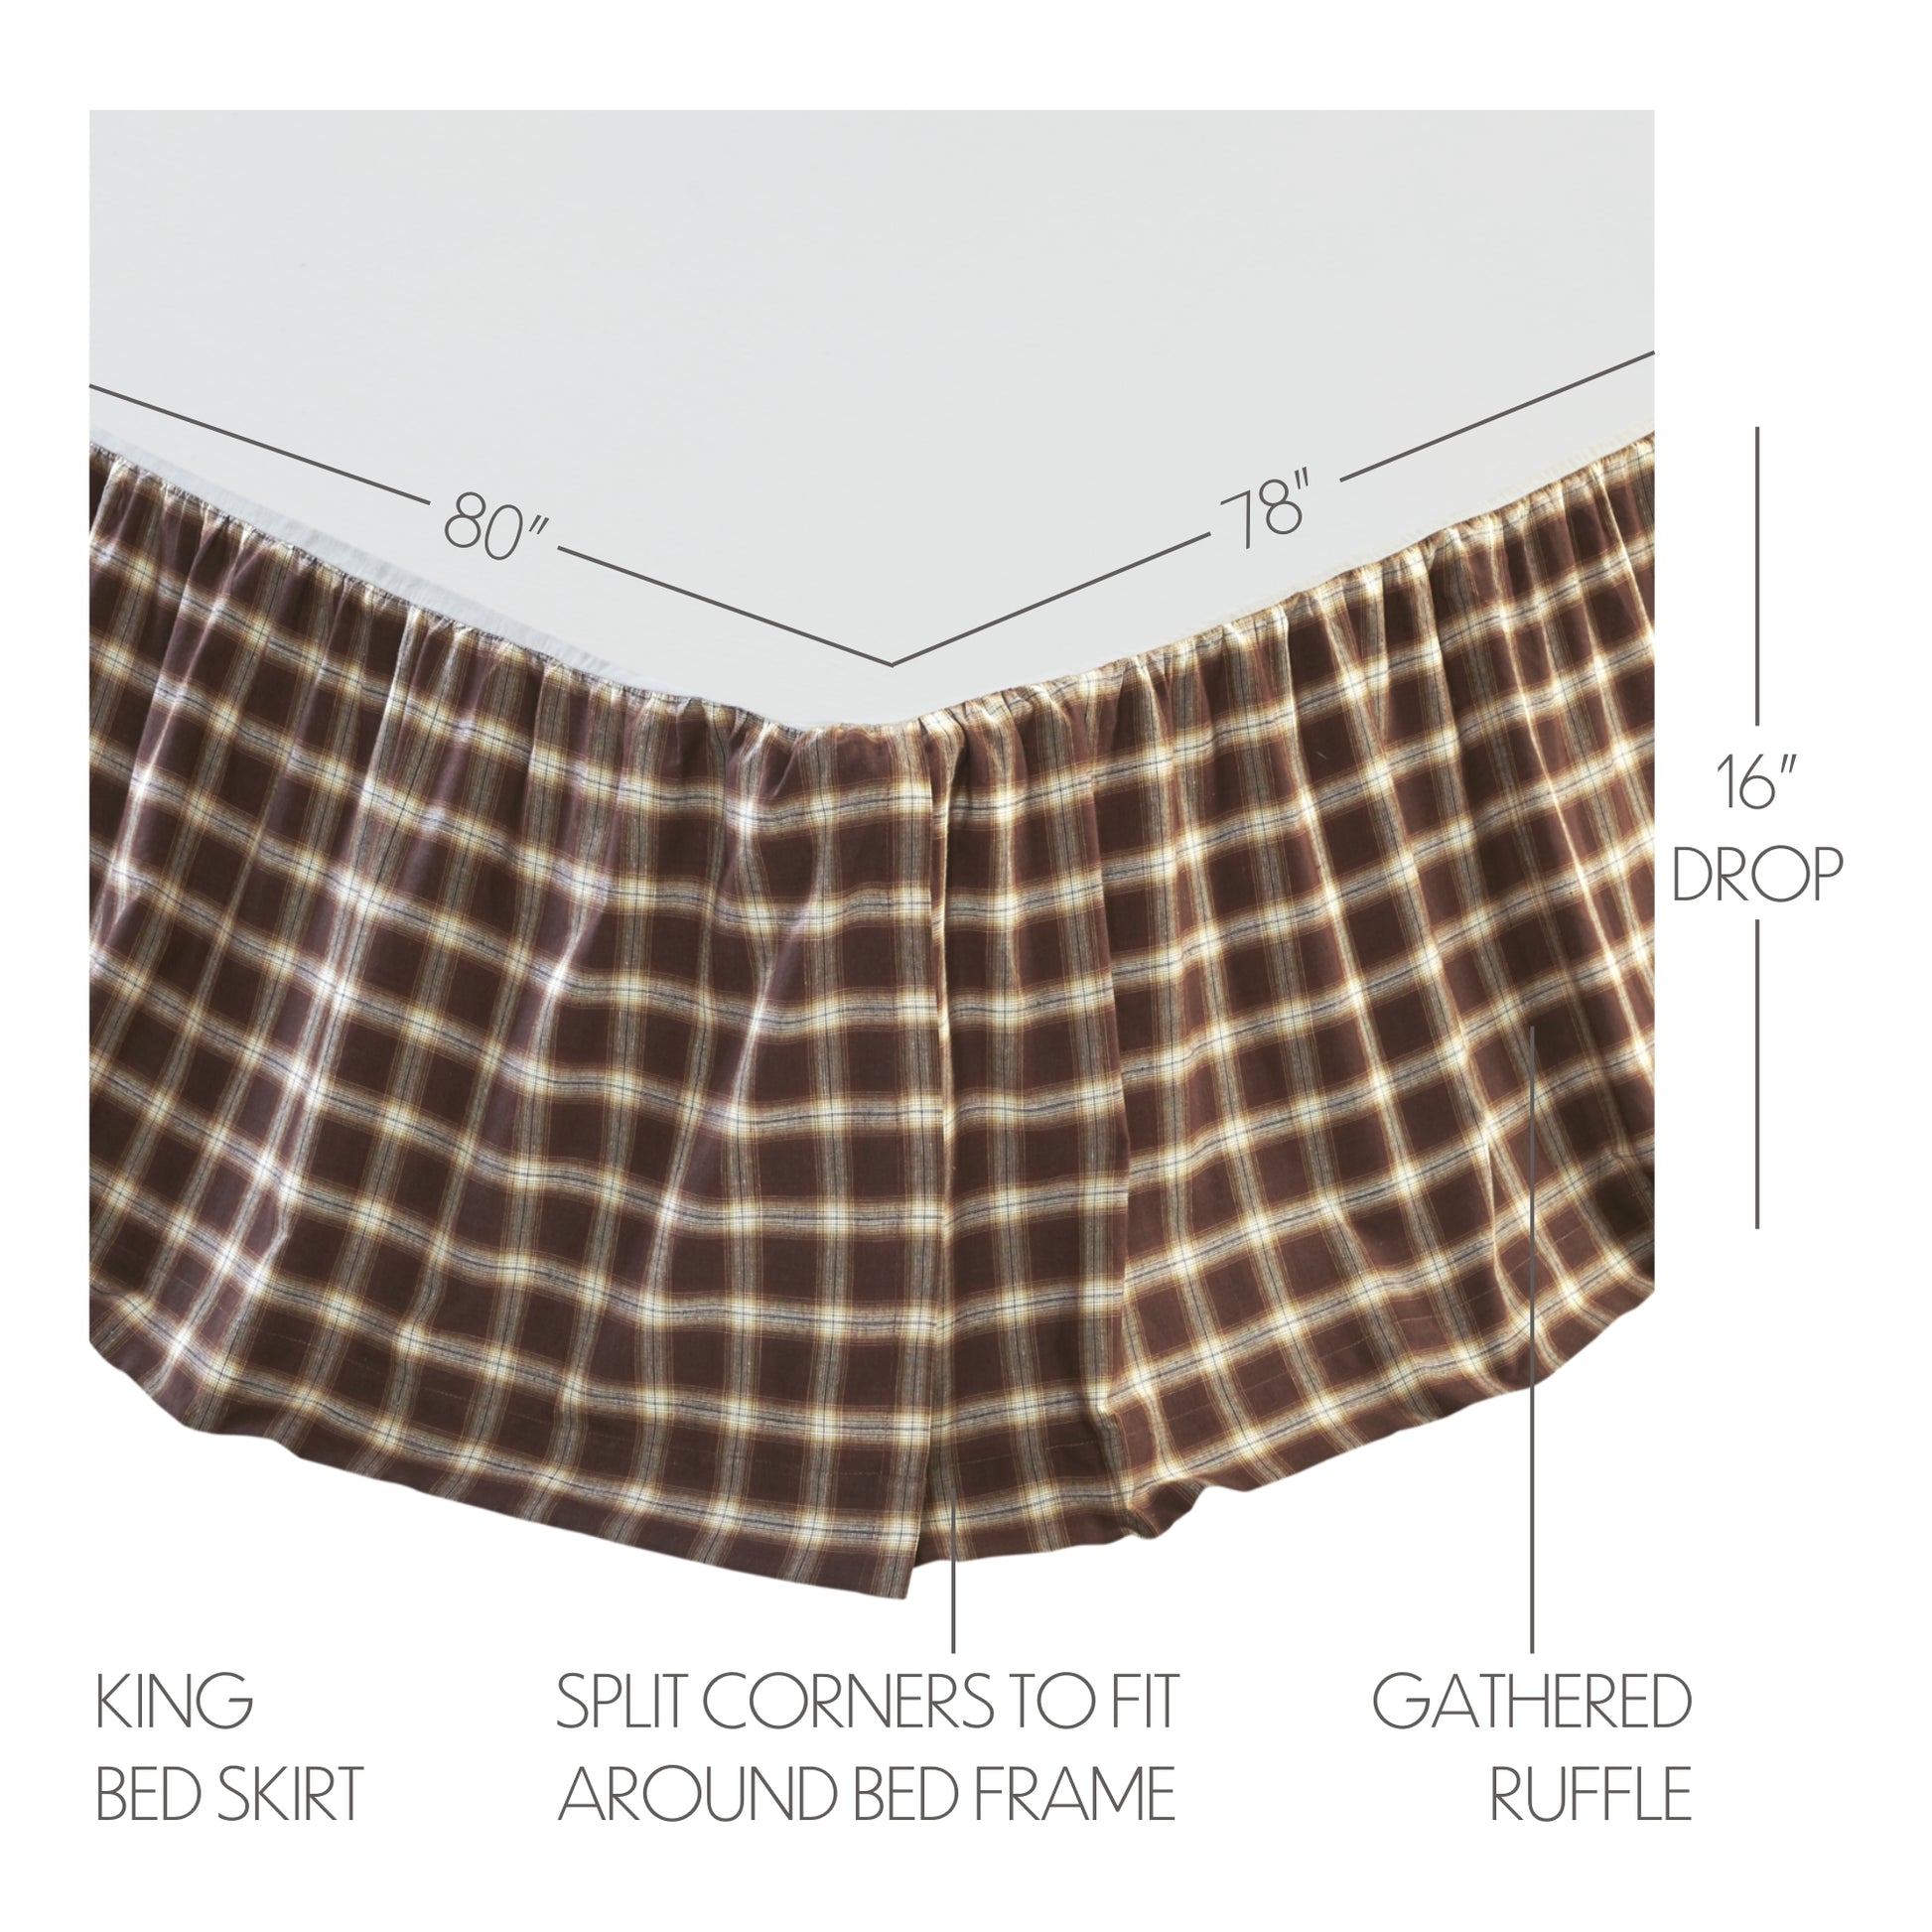 38014-Rory-King-Bed-Skirt-78x80x16-image-1